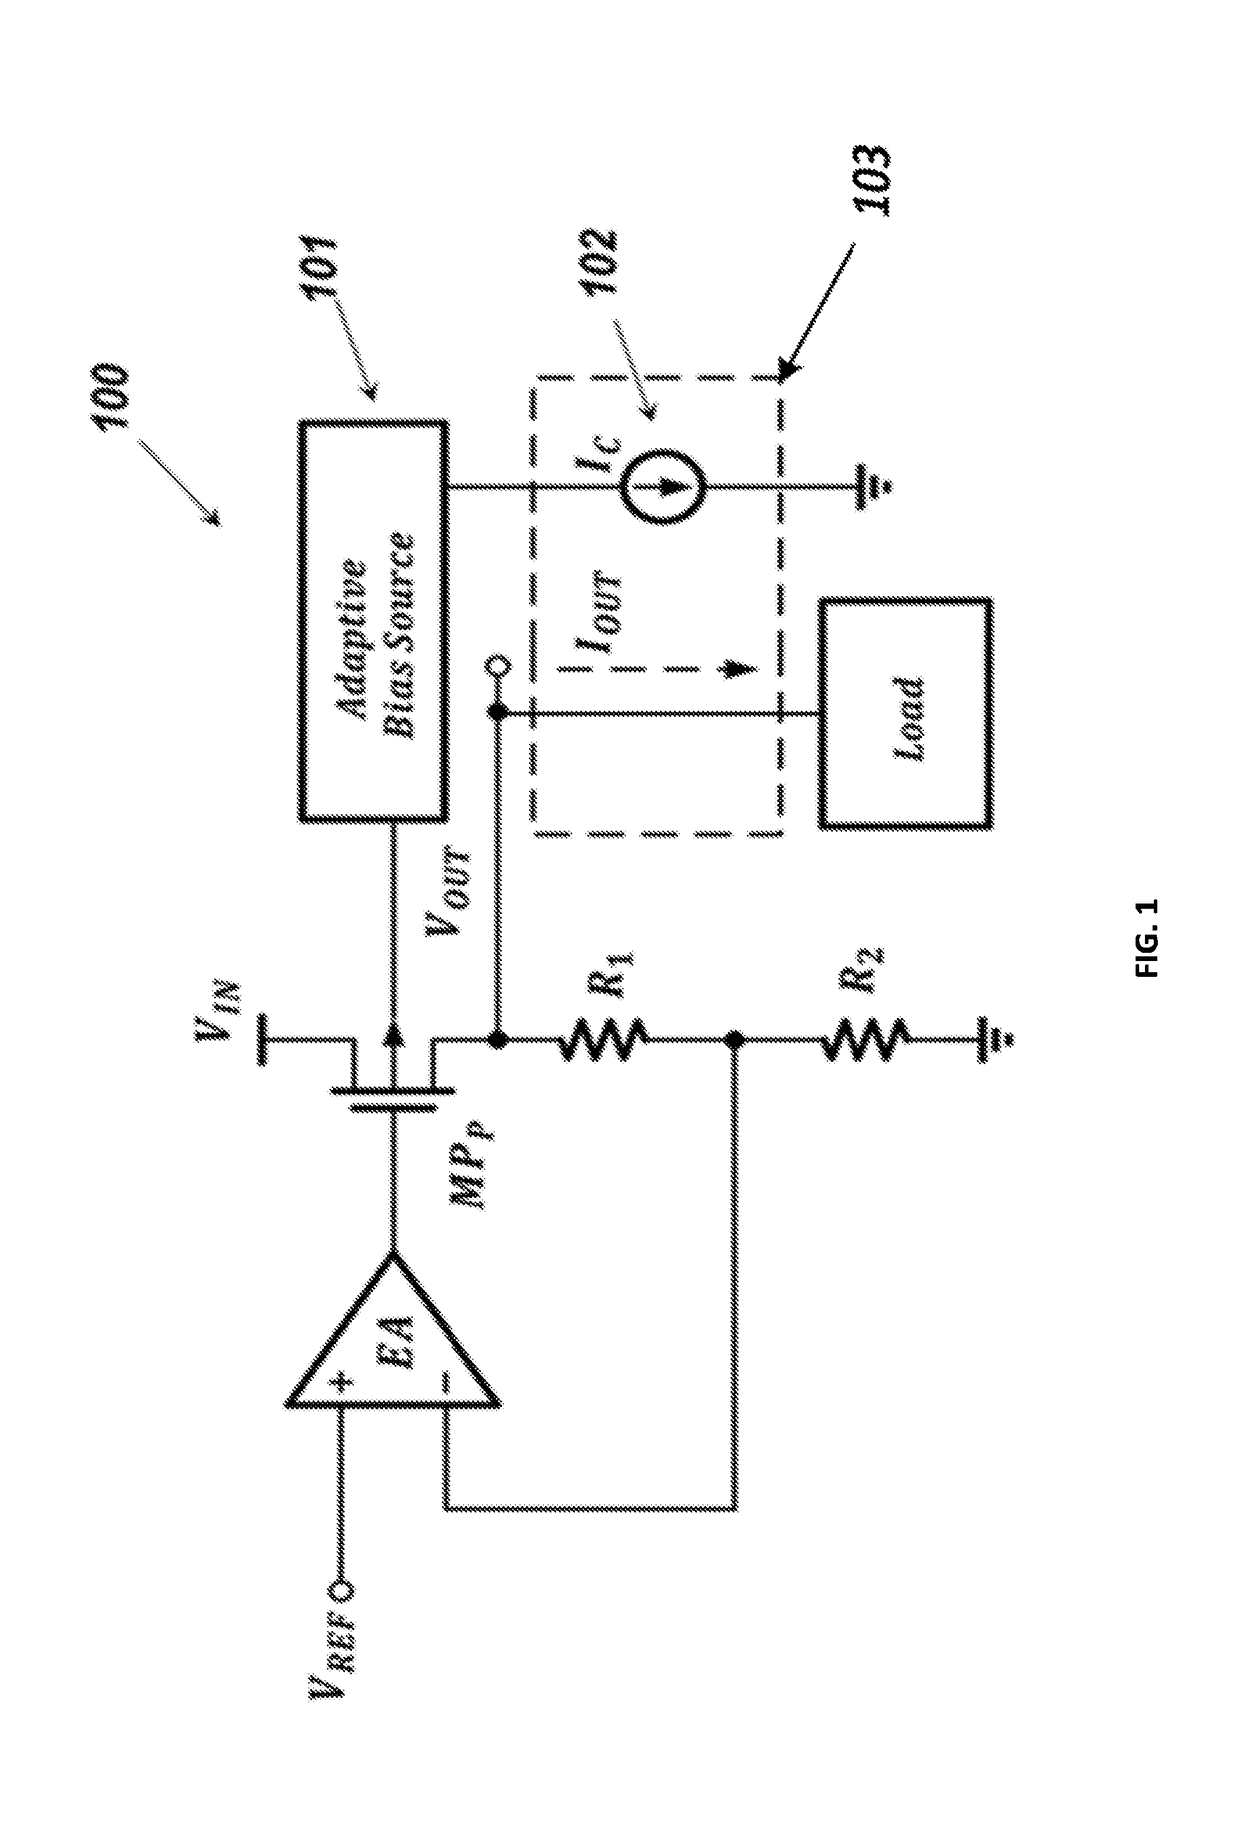 Adaptive bulk-bias technique to improve supply noise rejection, load regulation and transient performance of voltage regulators